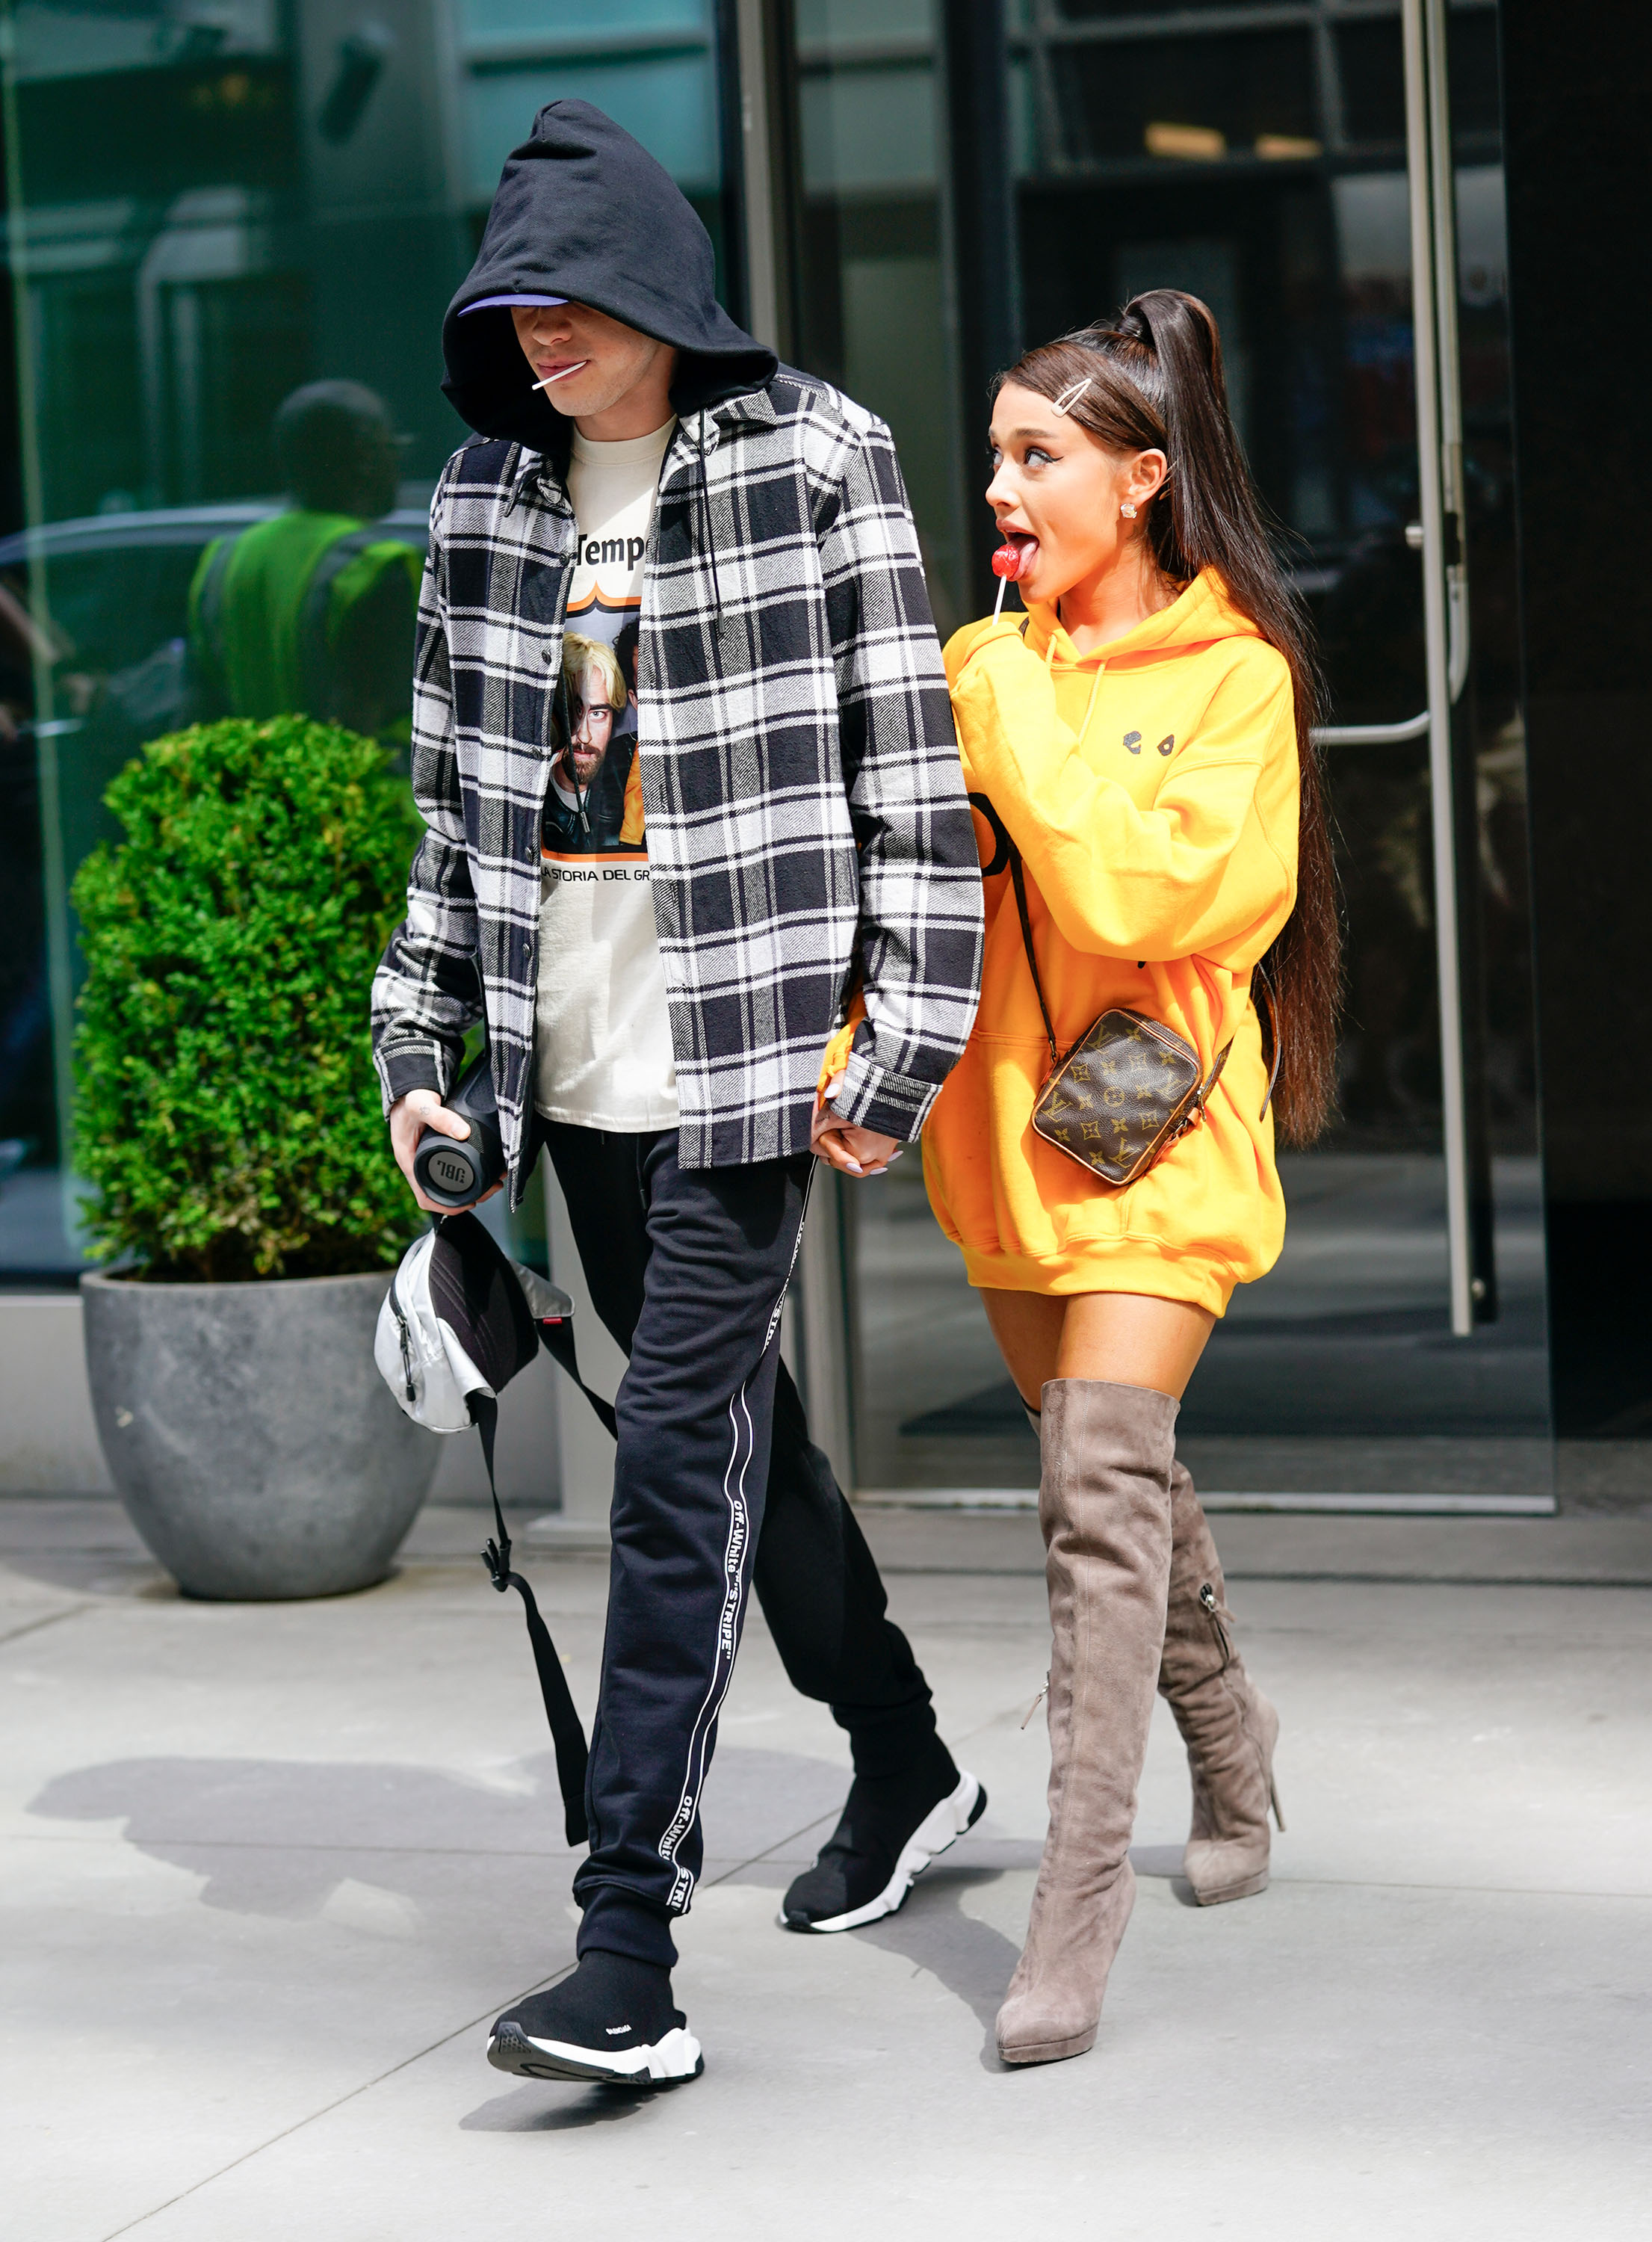 Ariana Grande wearing an oversized hoodie and boots and licking a lollipop on the streets of New York with Pete Davidson in 2018